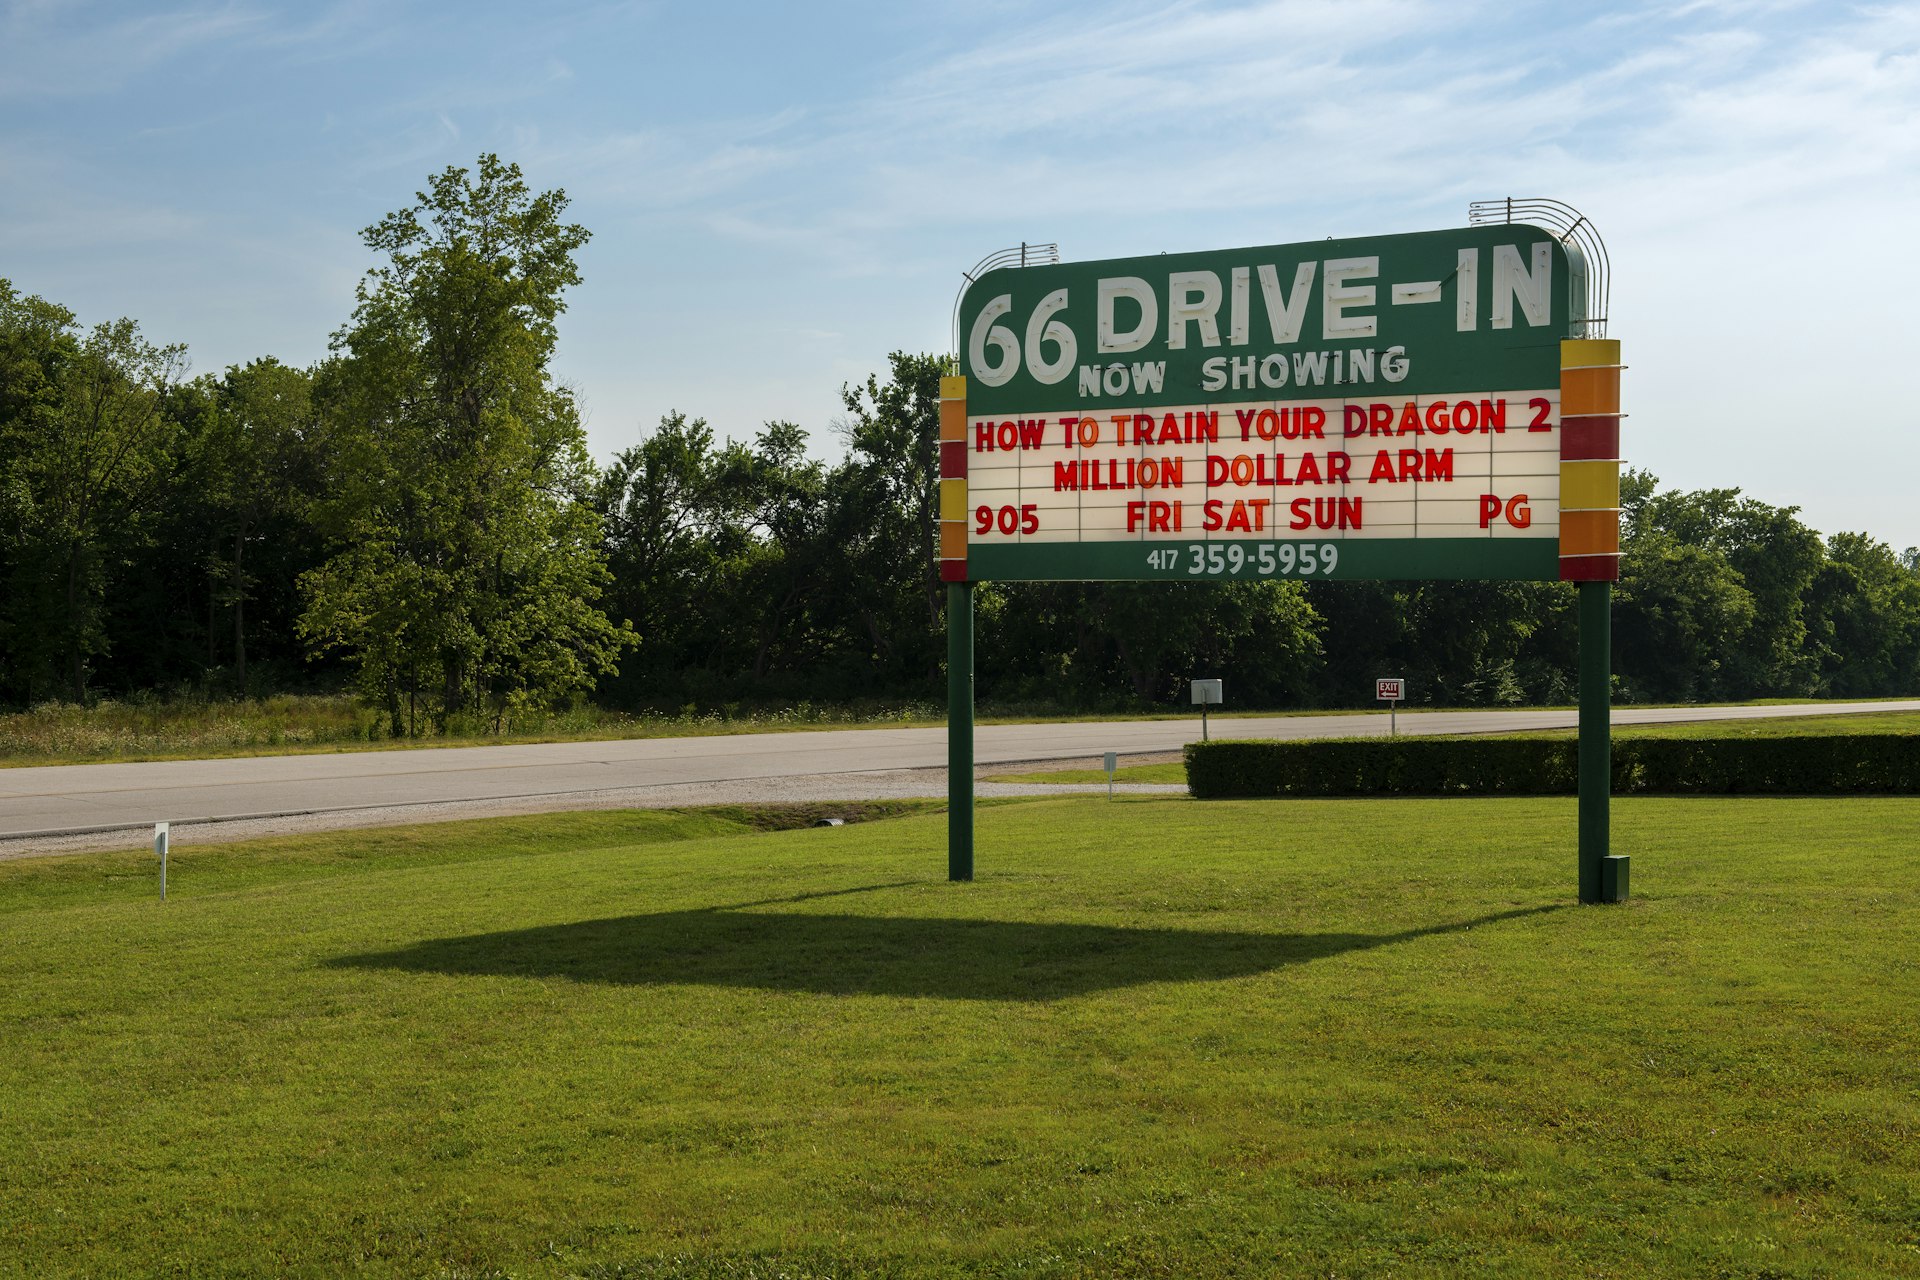 The billboard of the 66 Drive-in along the historic route 66 in the city of Carthage.